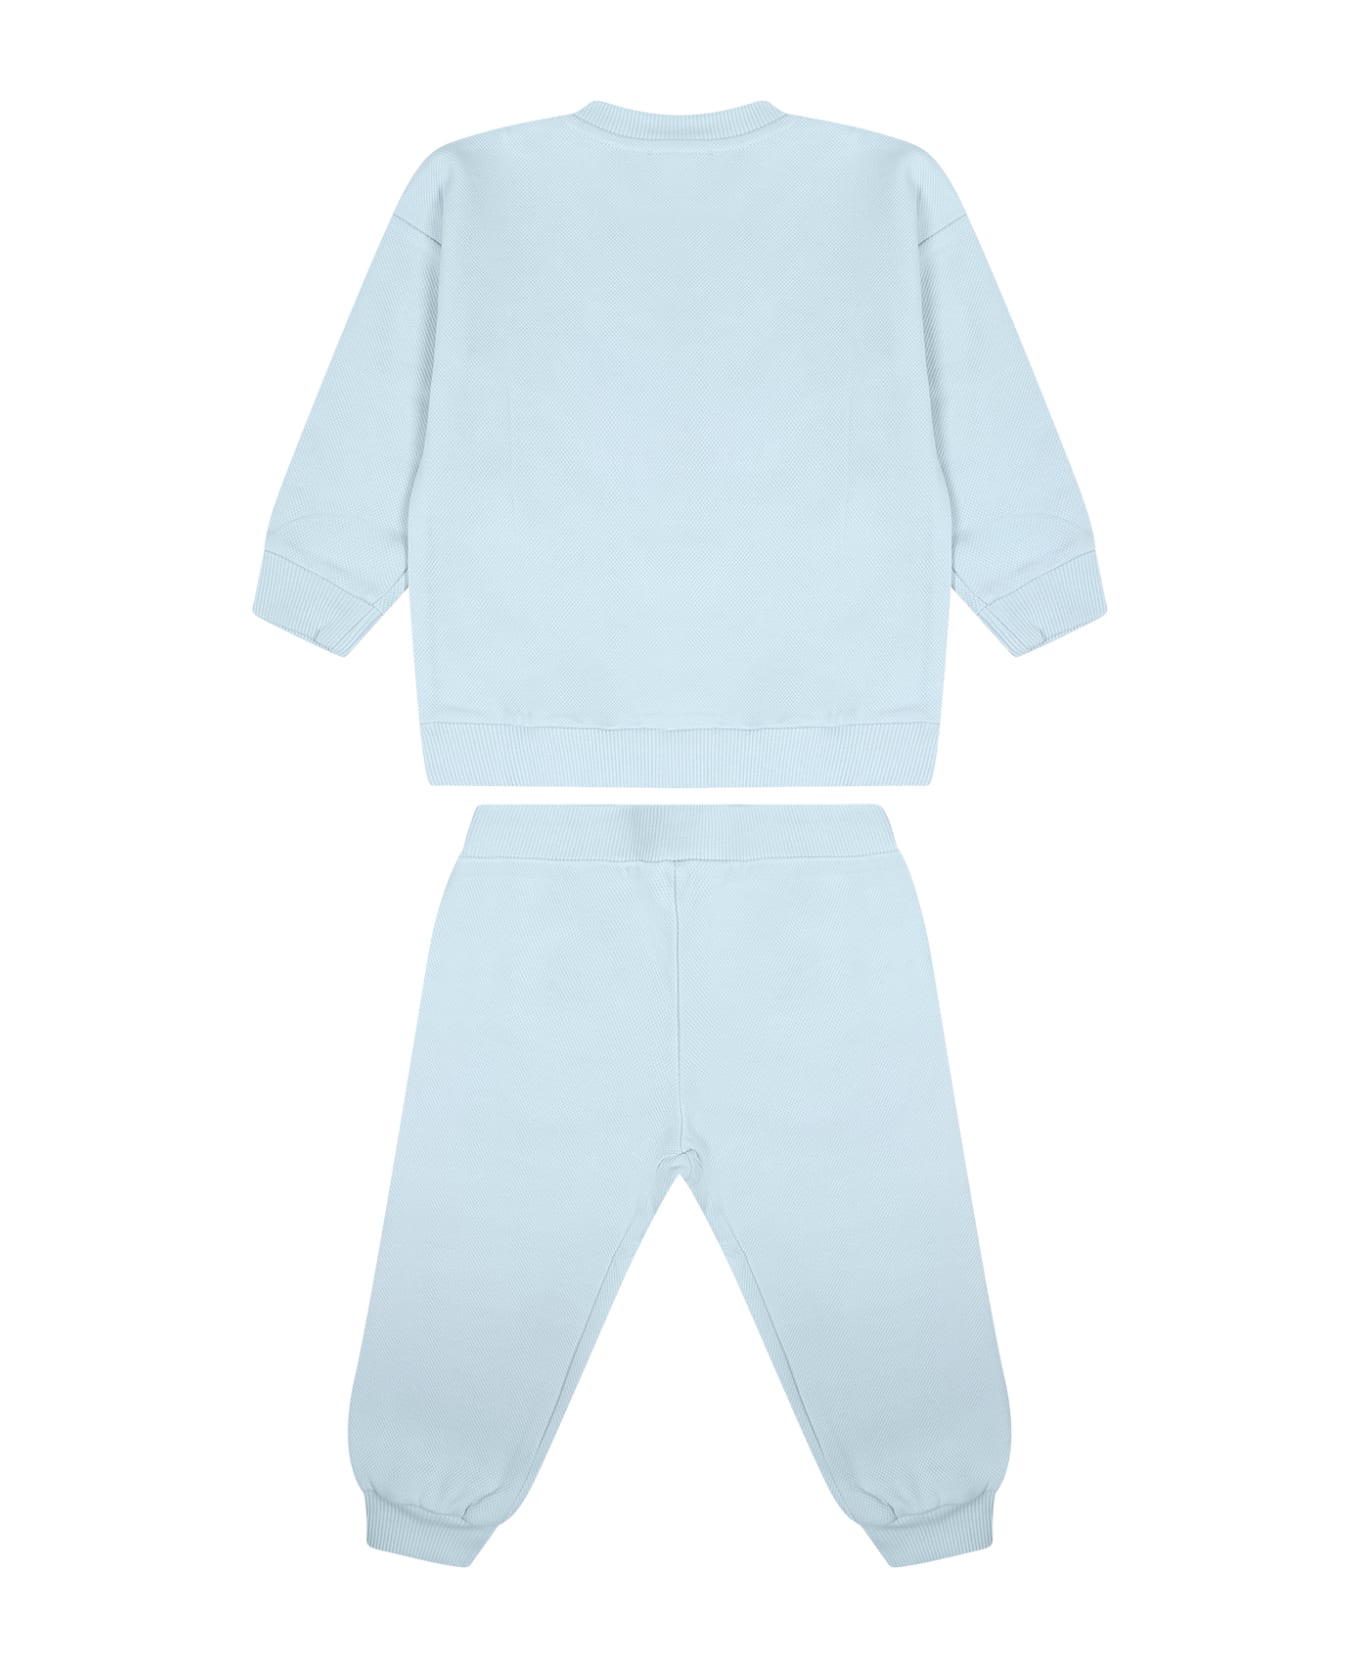 Moschino Light Blue Set For Baby Boy With Teddy Bear And Logo - Light Blue ボトムス